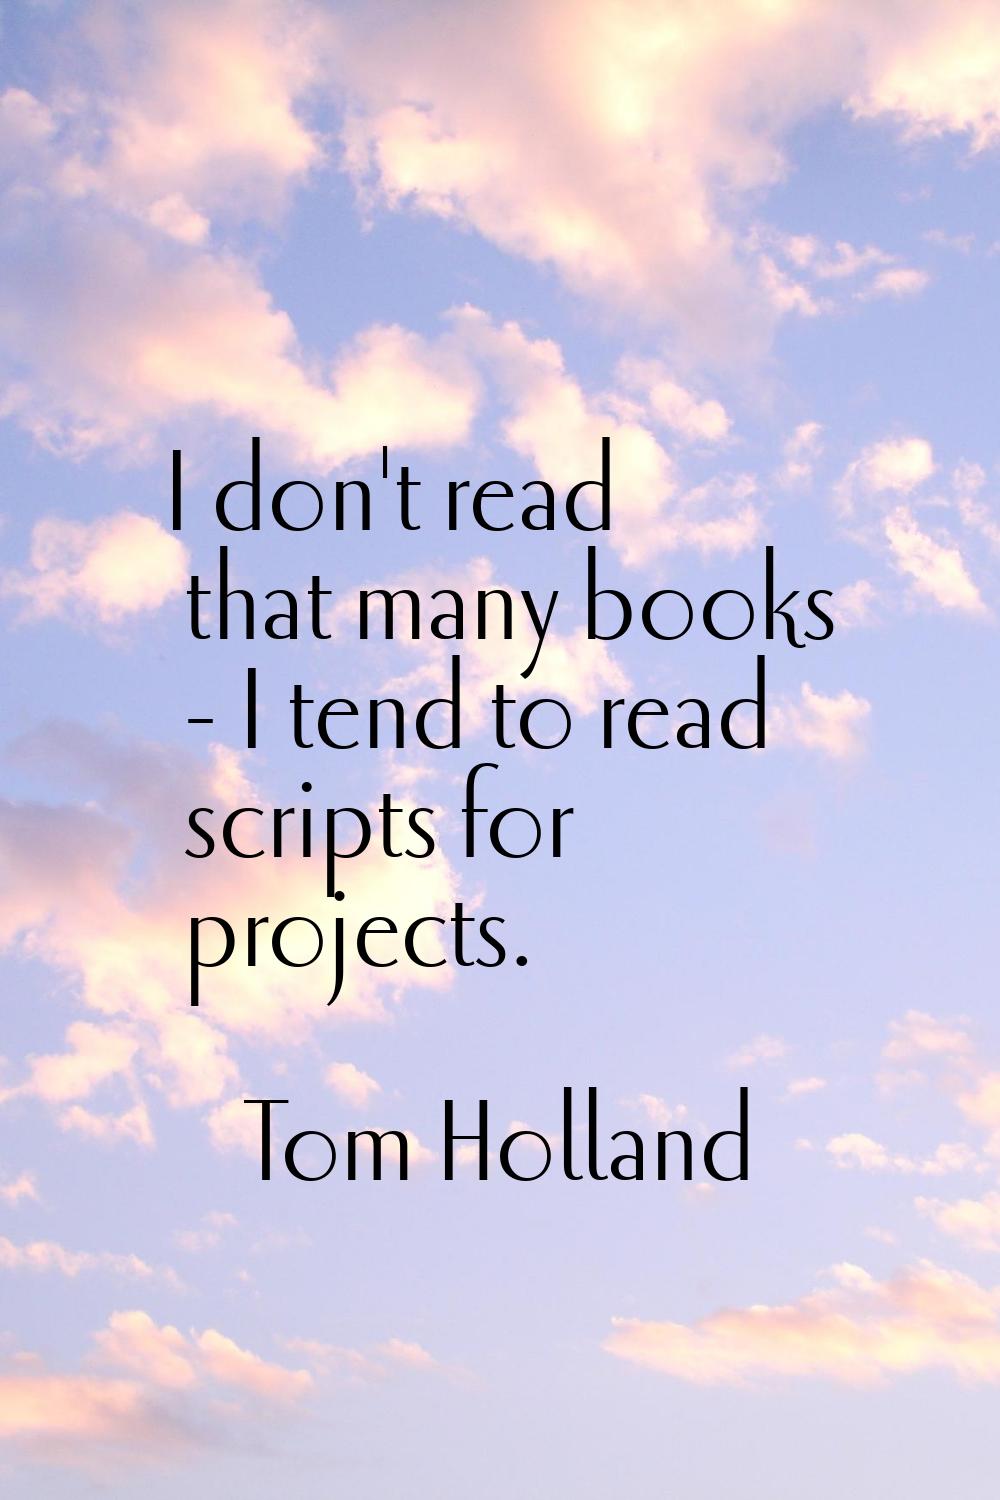 I don't read that many books - I tend to read scripts for projects.